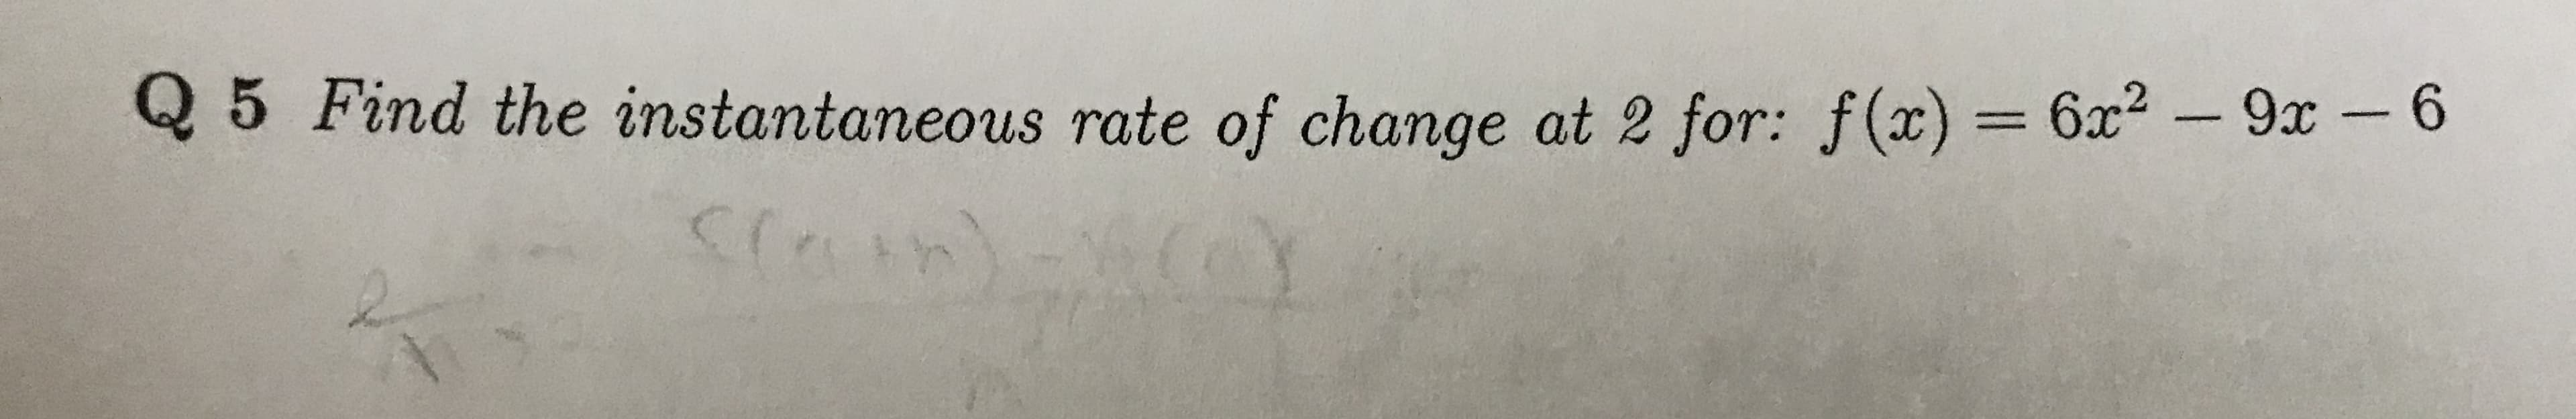 Q5 Find the instantaneous rate of change at 2 for: f(x) = 6x2-9x -6
